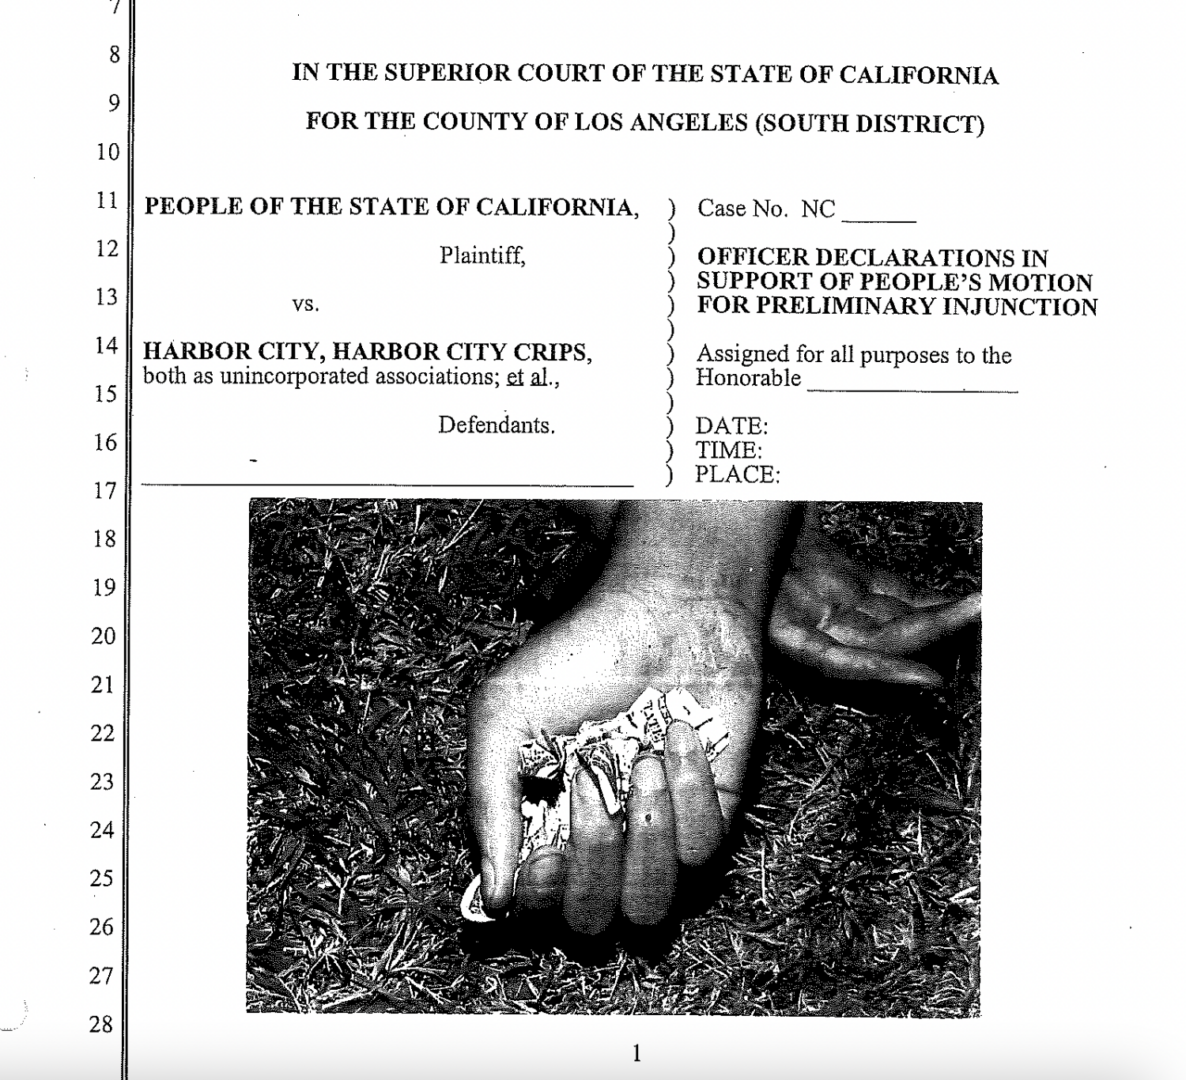 A screenshot of a court filing submitted by the city in support of a gang injunction covering Normont Terrace. The document features a photograph of a deceased person's hand holding crumpled dollar bills.